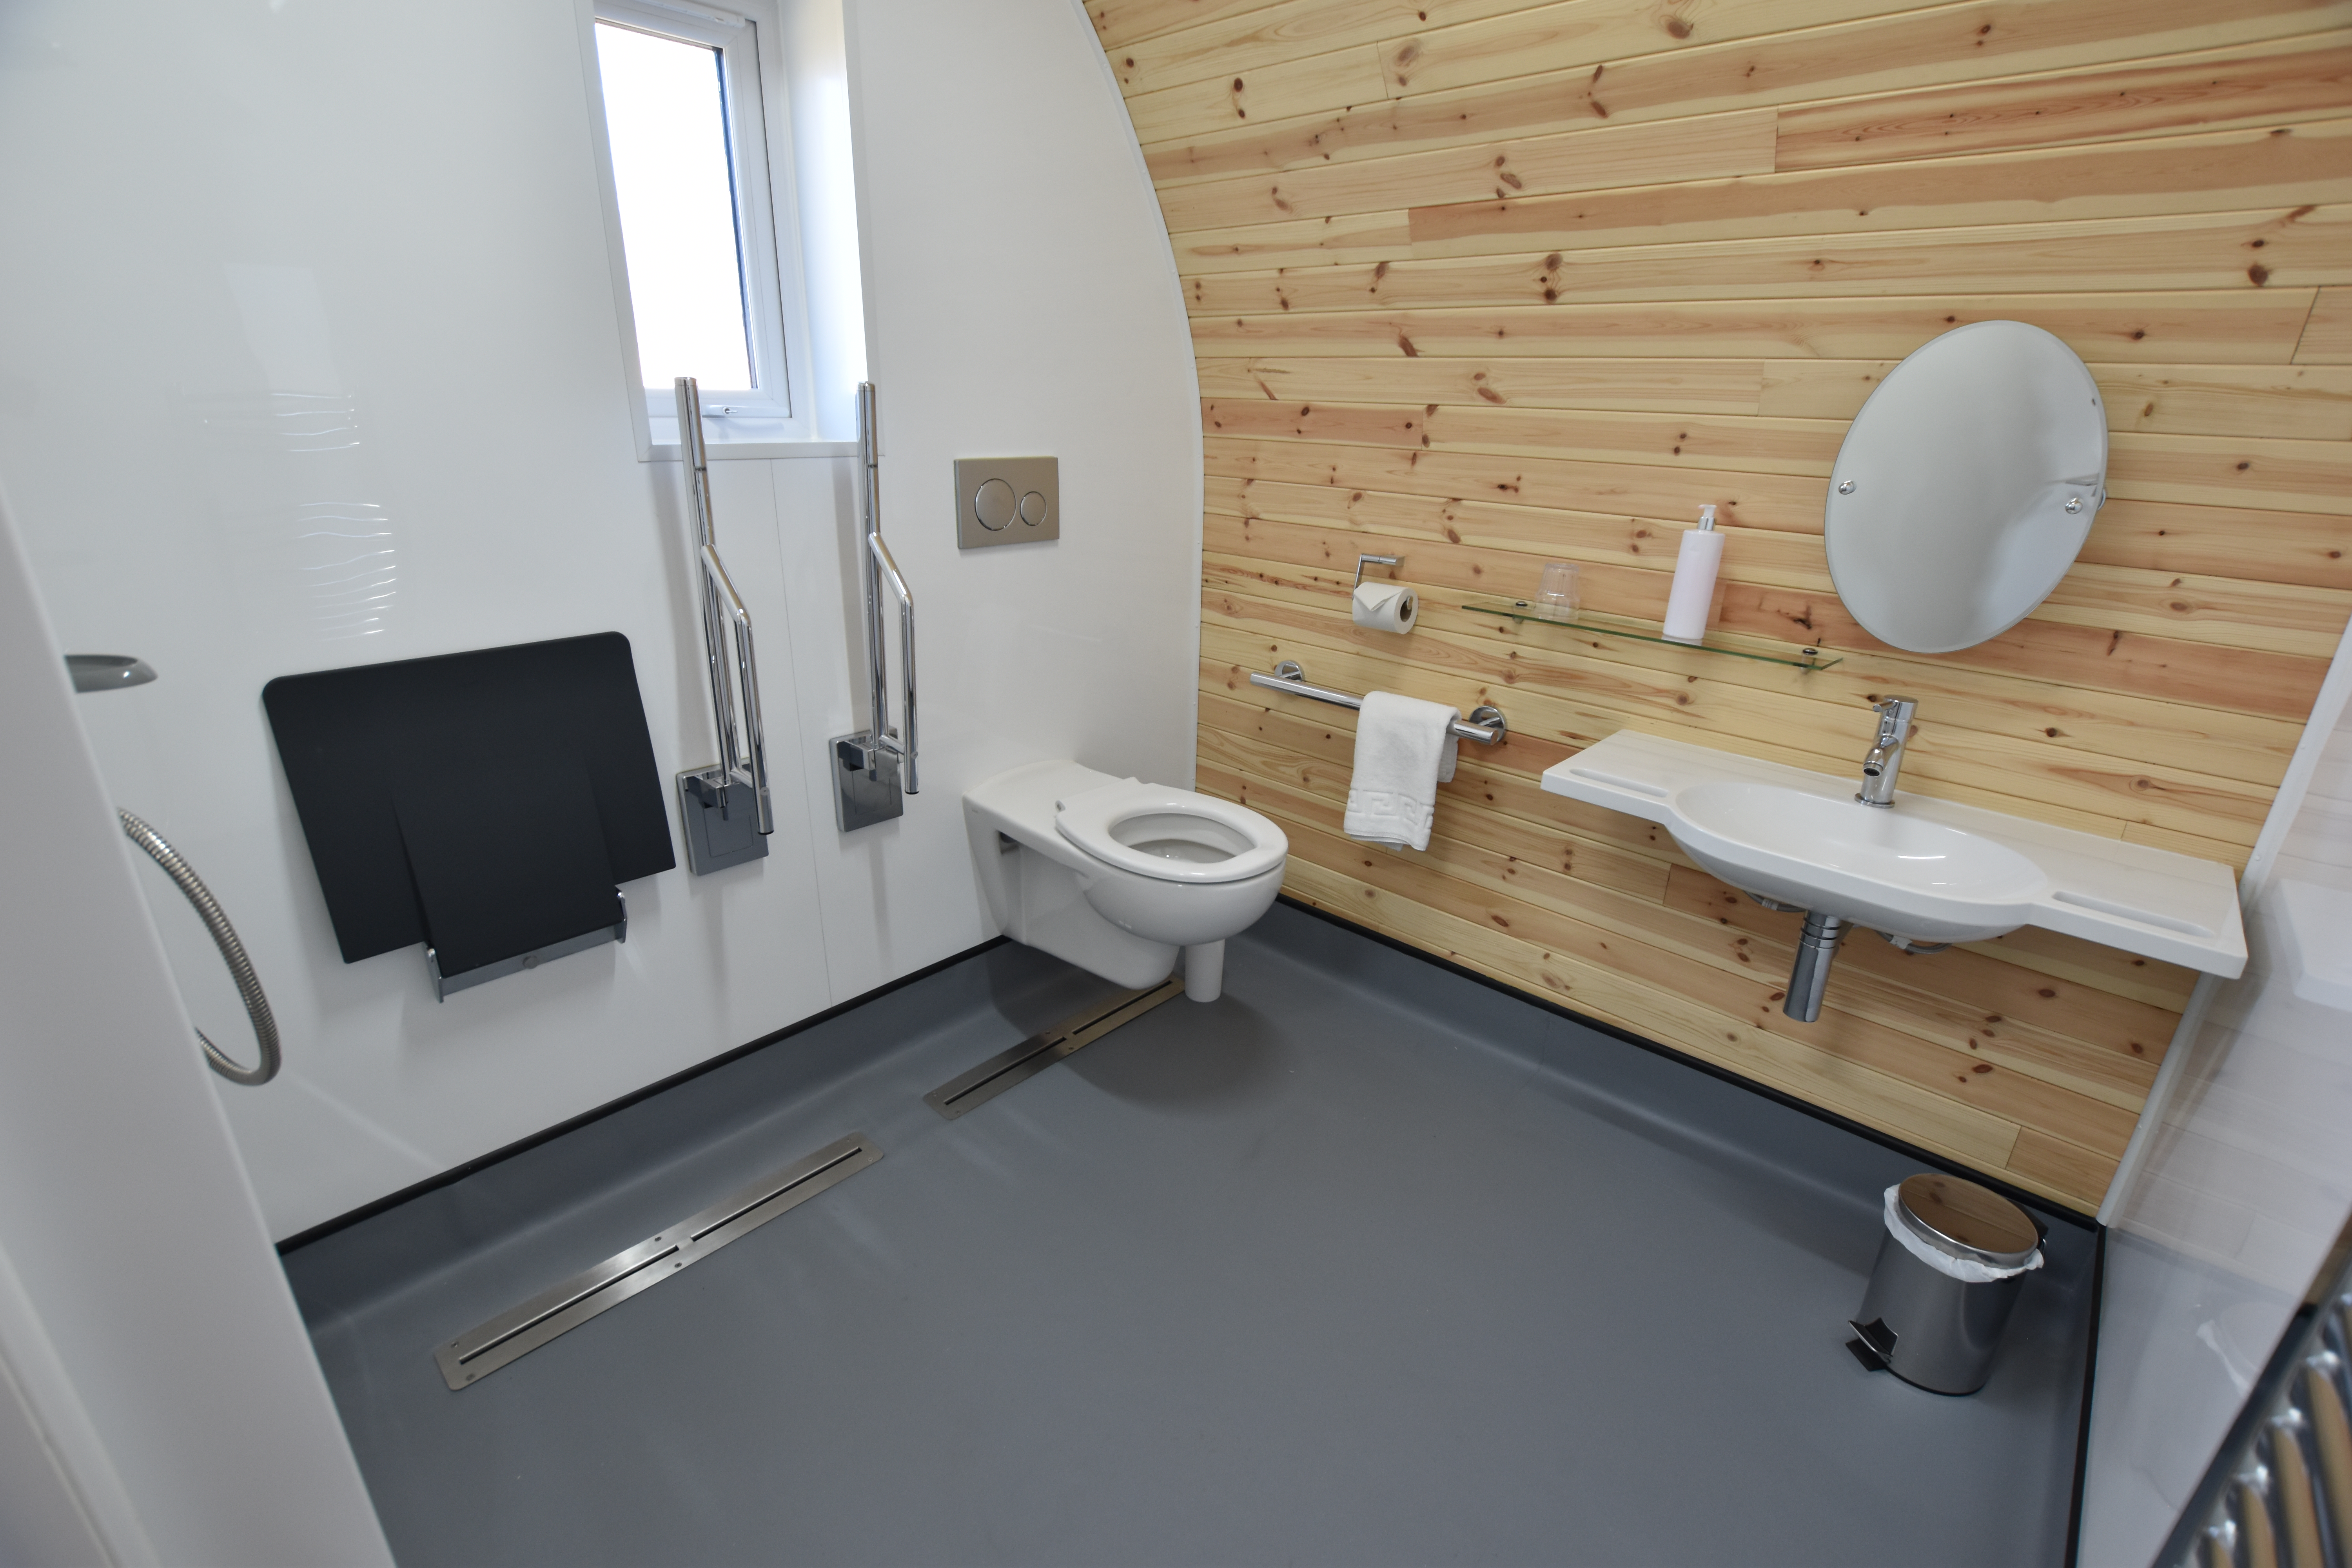 Accessible OmniPod bathroom featuring curved natural wood clad wall, wall-mounted basin with integrated hand-grips, toilet and shower seat with grab rails. 